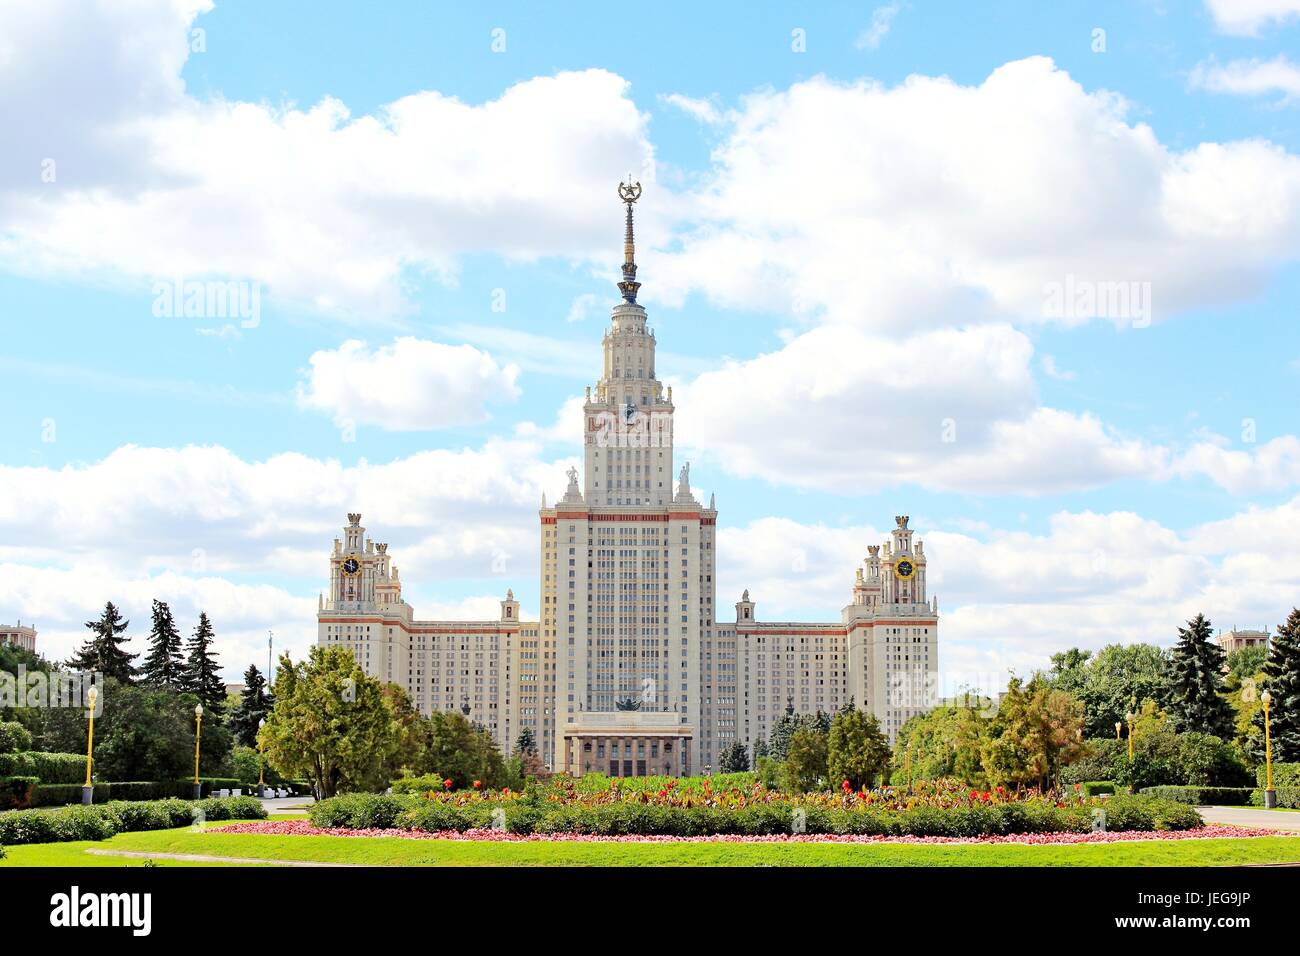 Stalin Skyscraper - Moscow State University in Moscow, Russia Stock Photo